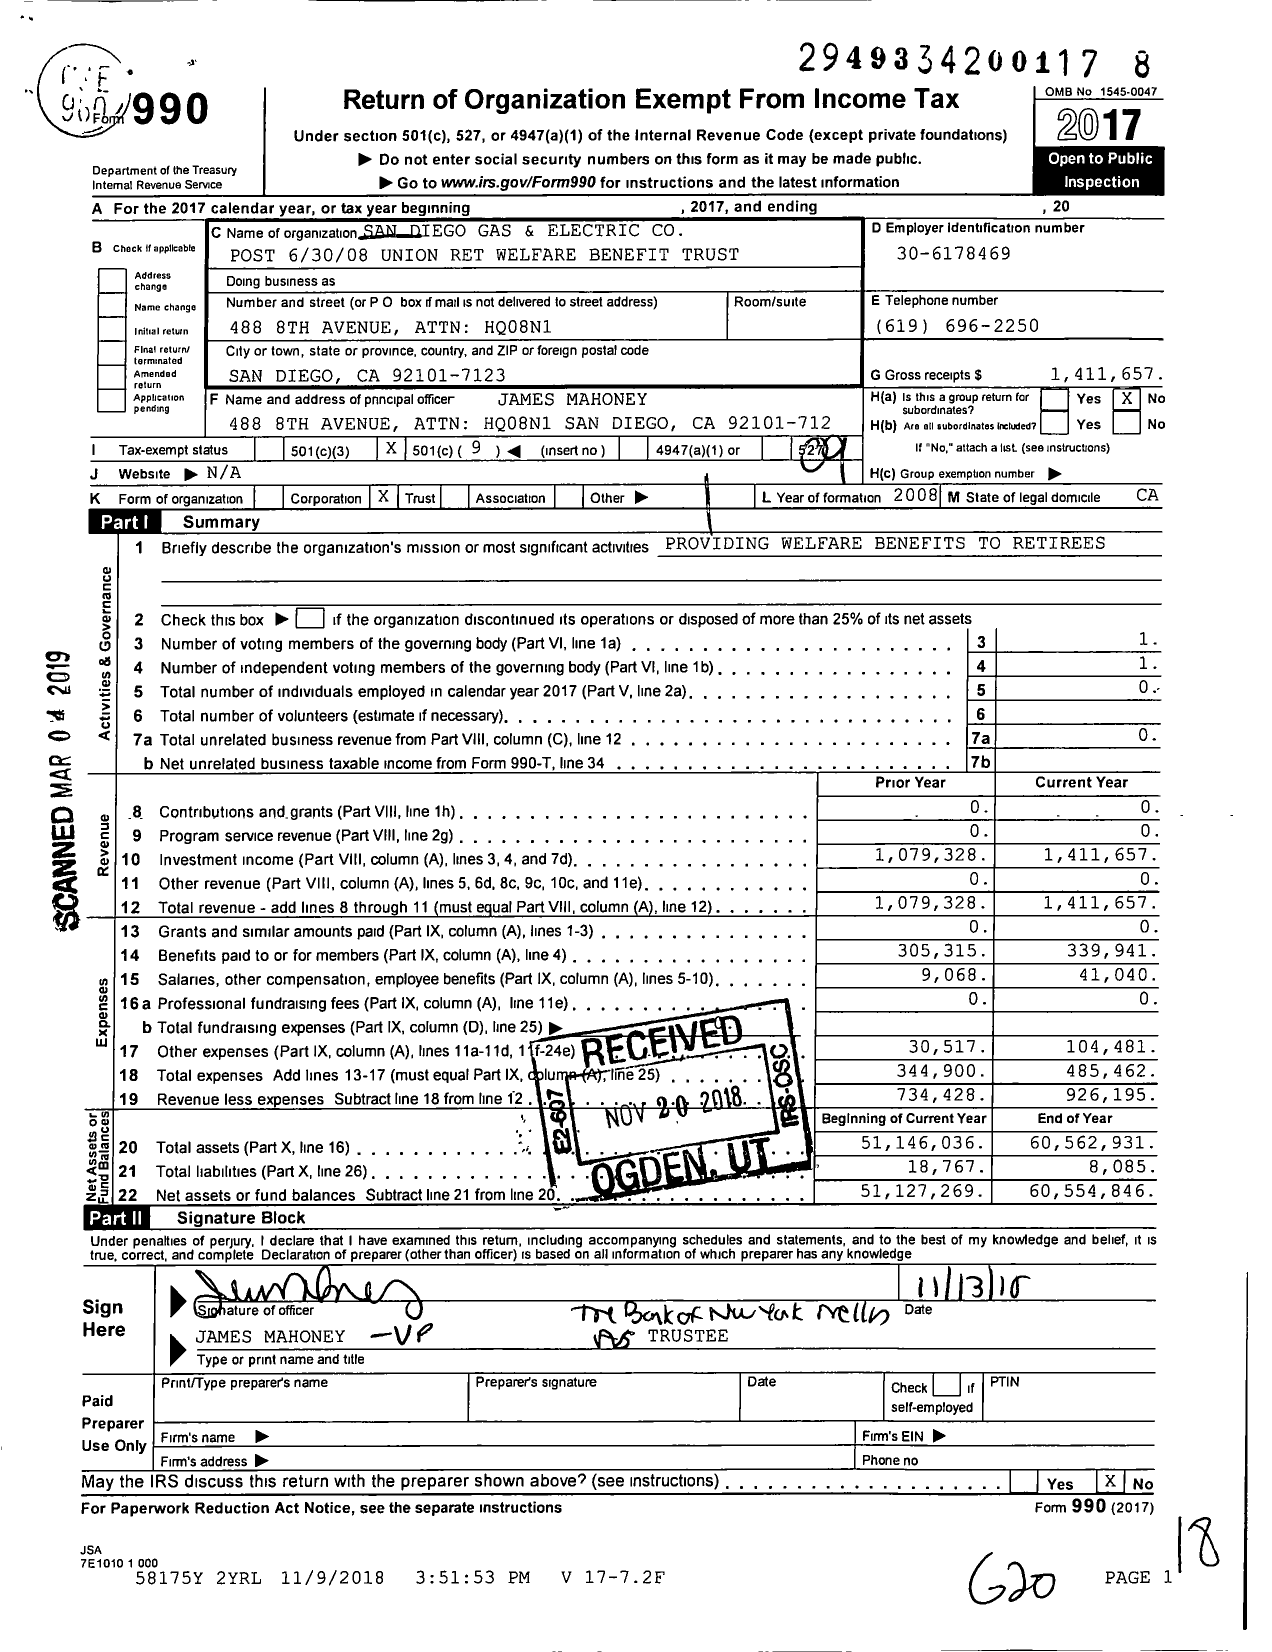 Image of first page of 2017 Form 990O for San Diego Gas and Electric Post 6 / 30 / 08 Union Ret Welfare Benefit Trust